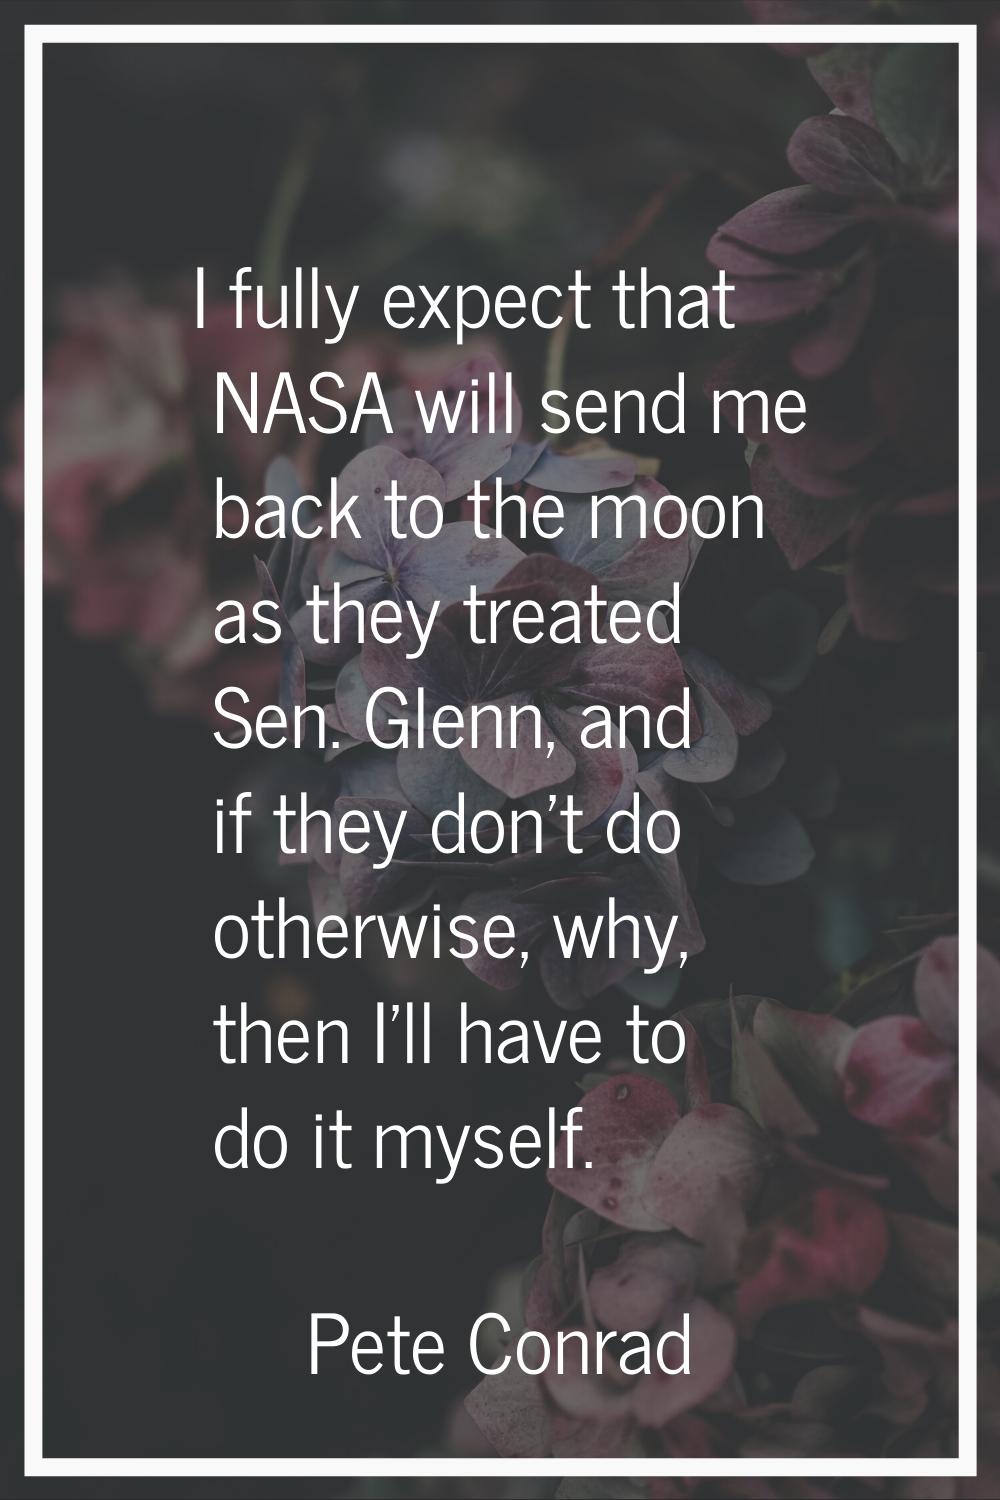 I fully expect that NASA will send me back to the moon as they treated Sen. Glenn, and if they don'